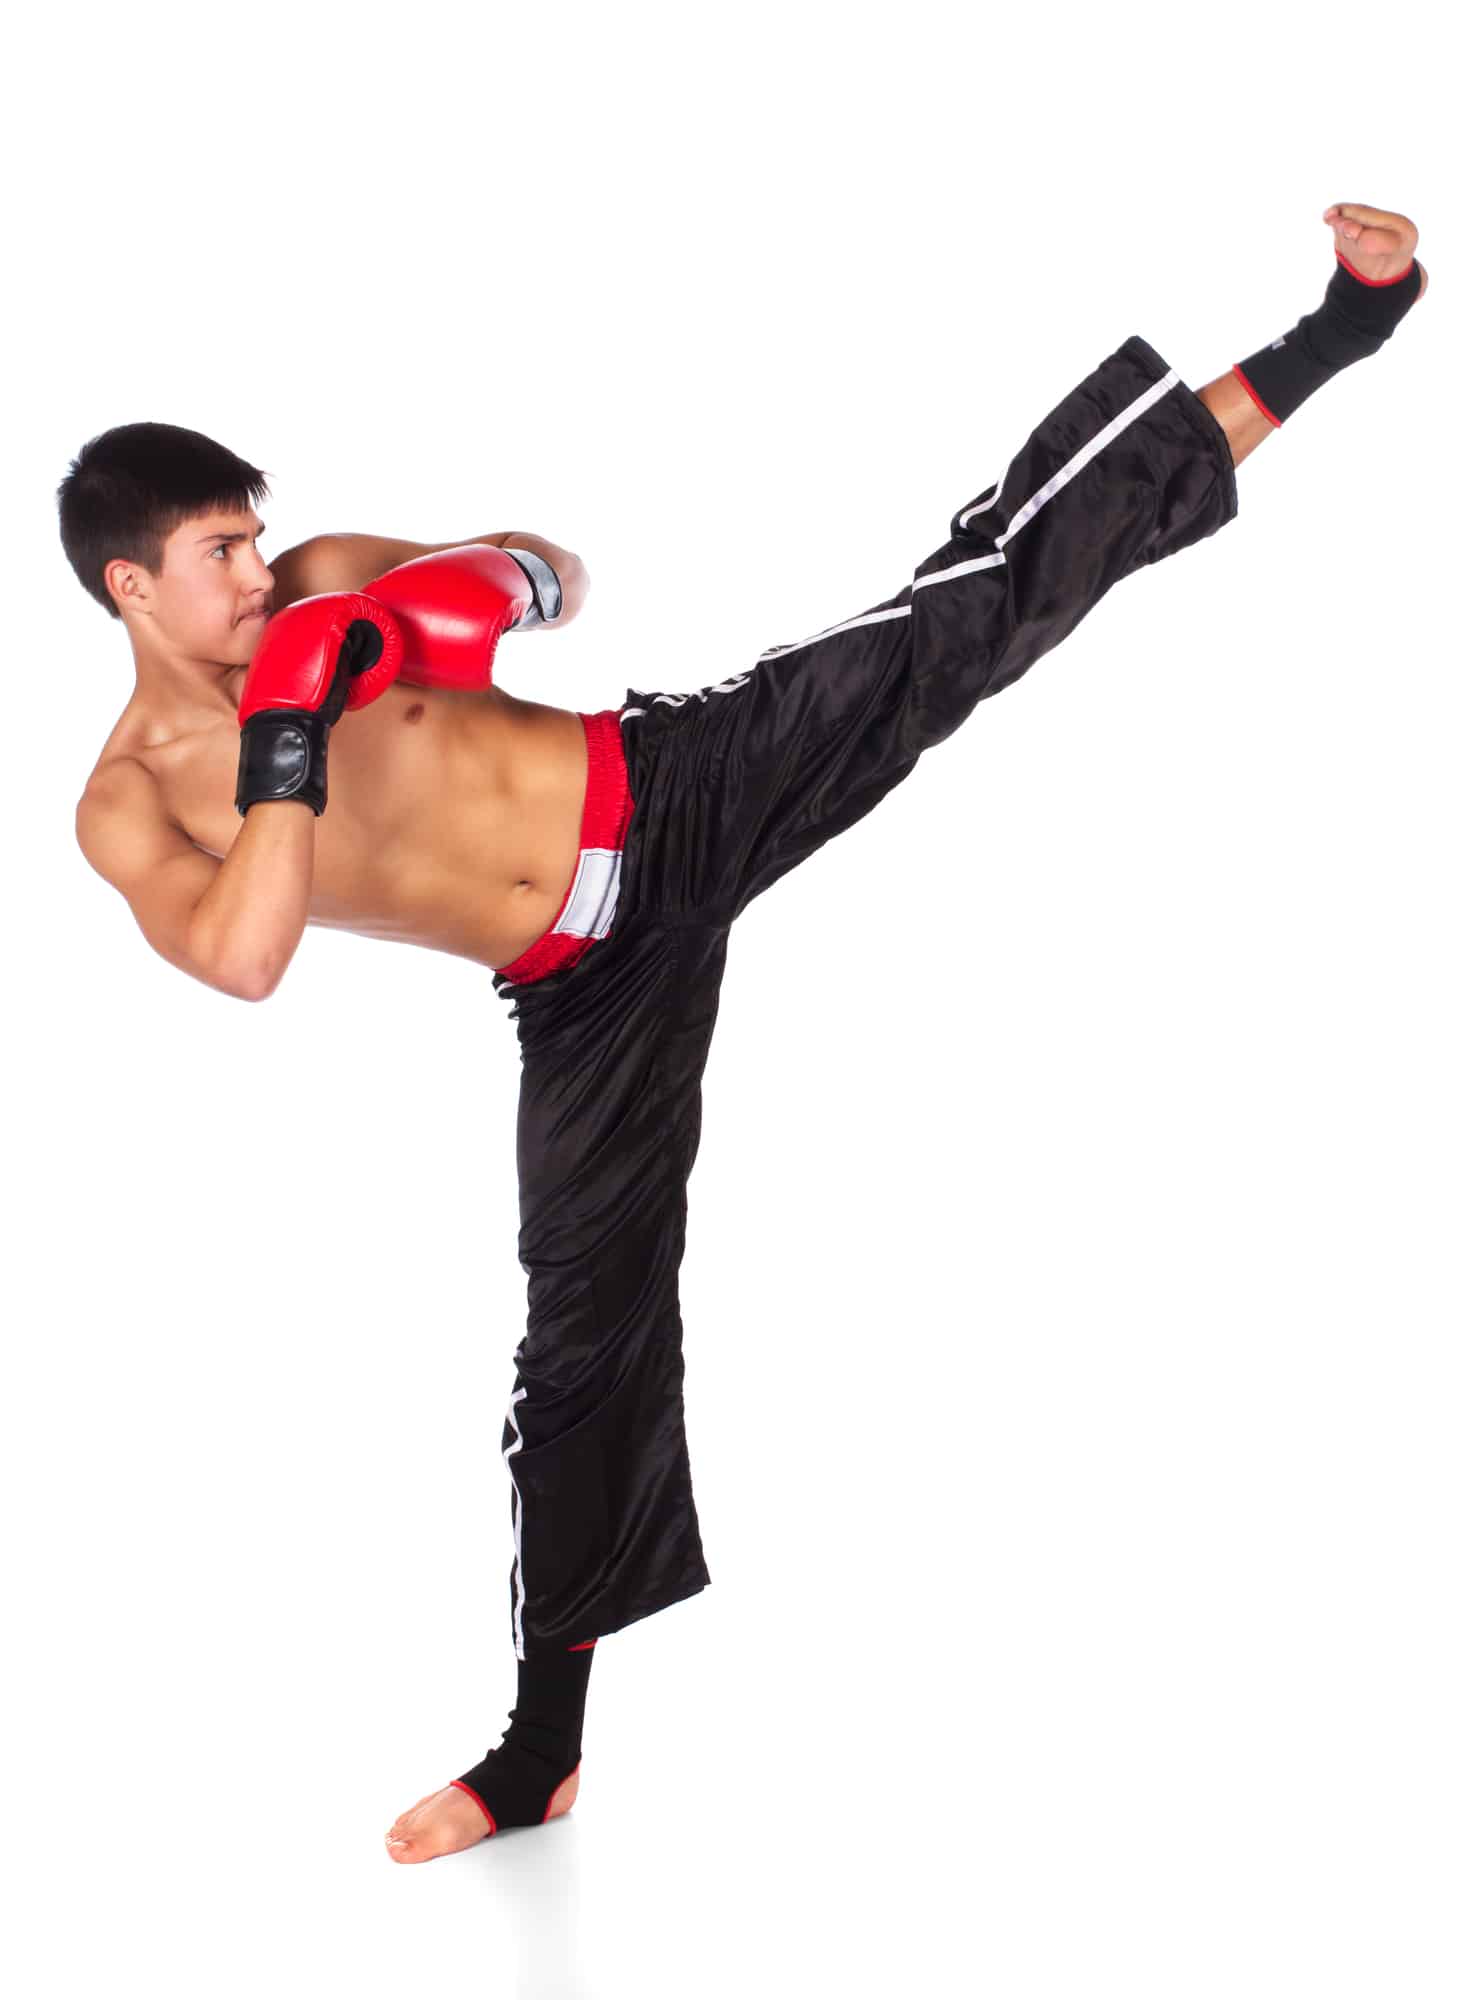 American Kickboxing: Origins and Influence